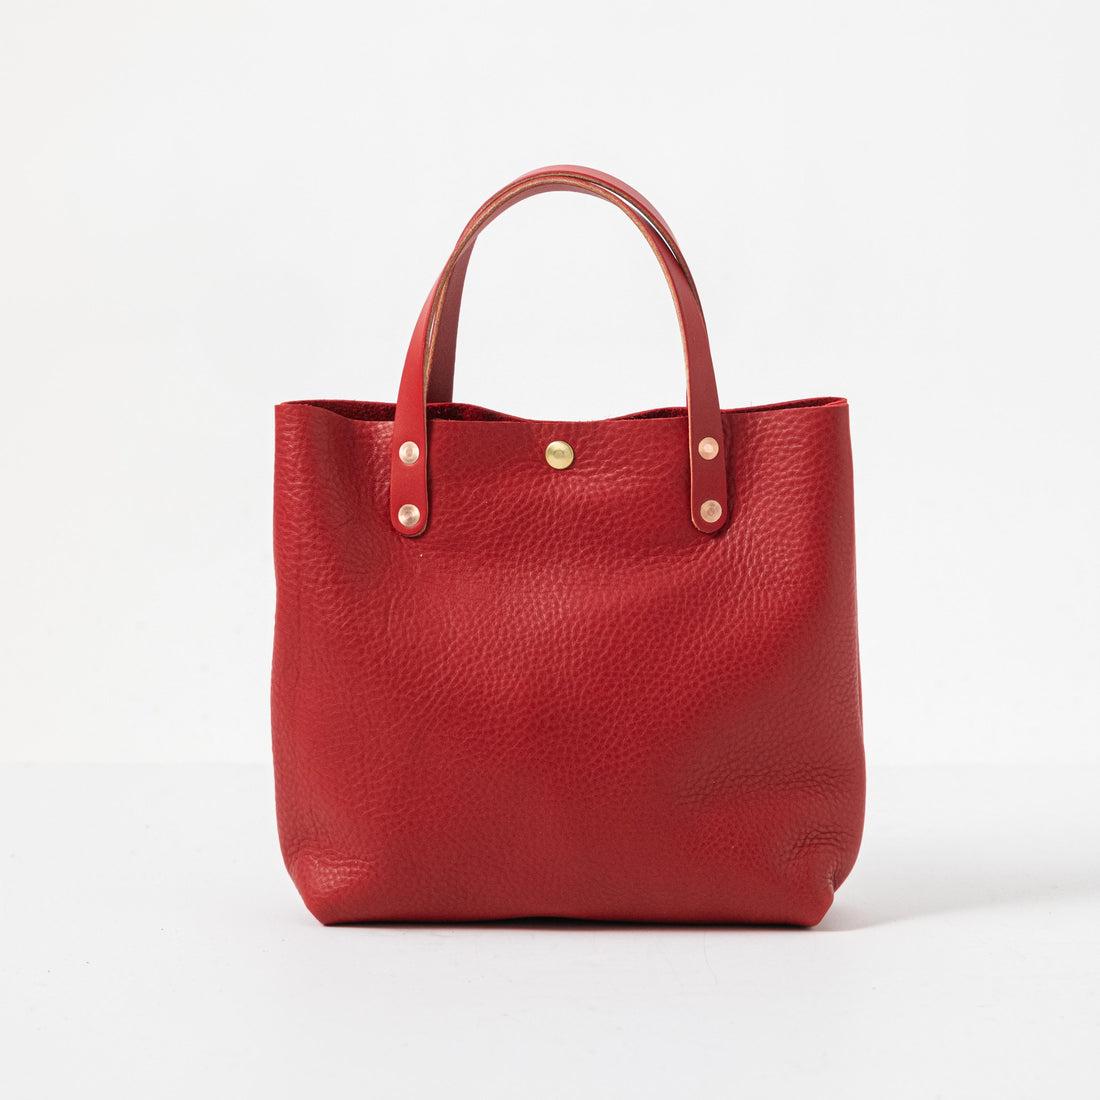 Red Leather Tote, Soft Leather Bag, Real Leather Tote Bag in Red